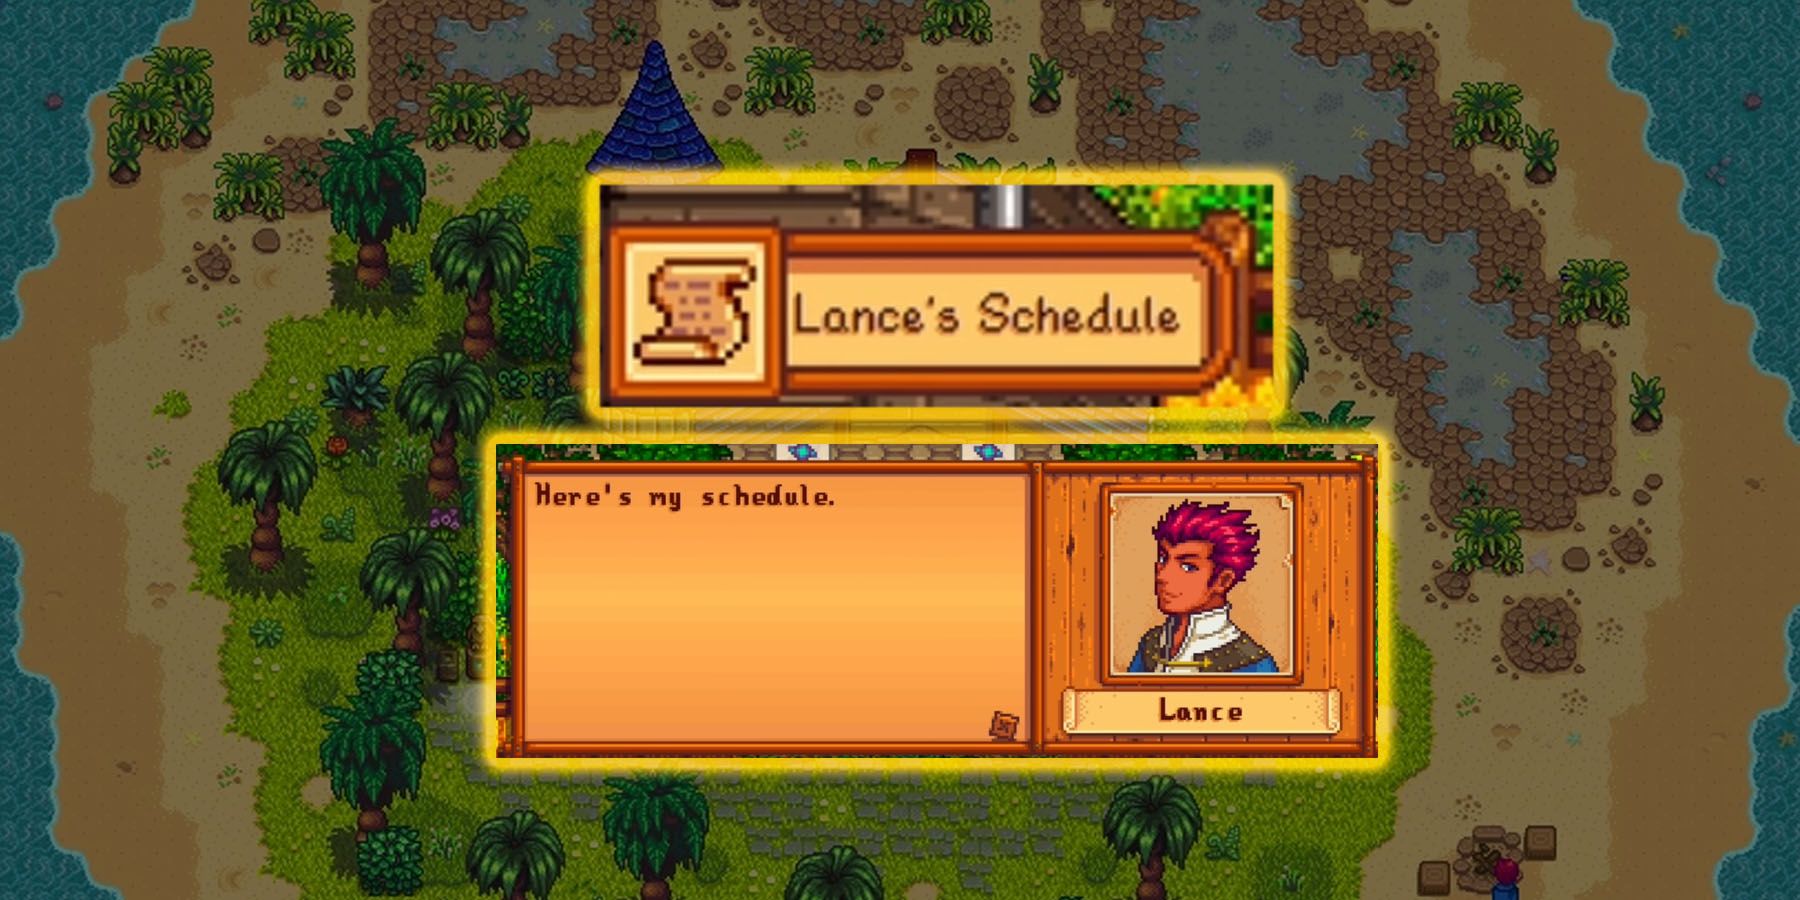 Lance giving his schedule